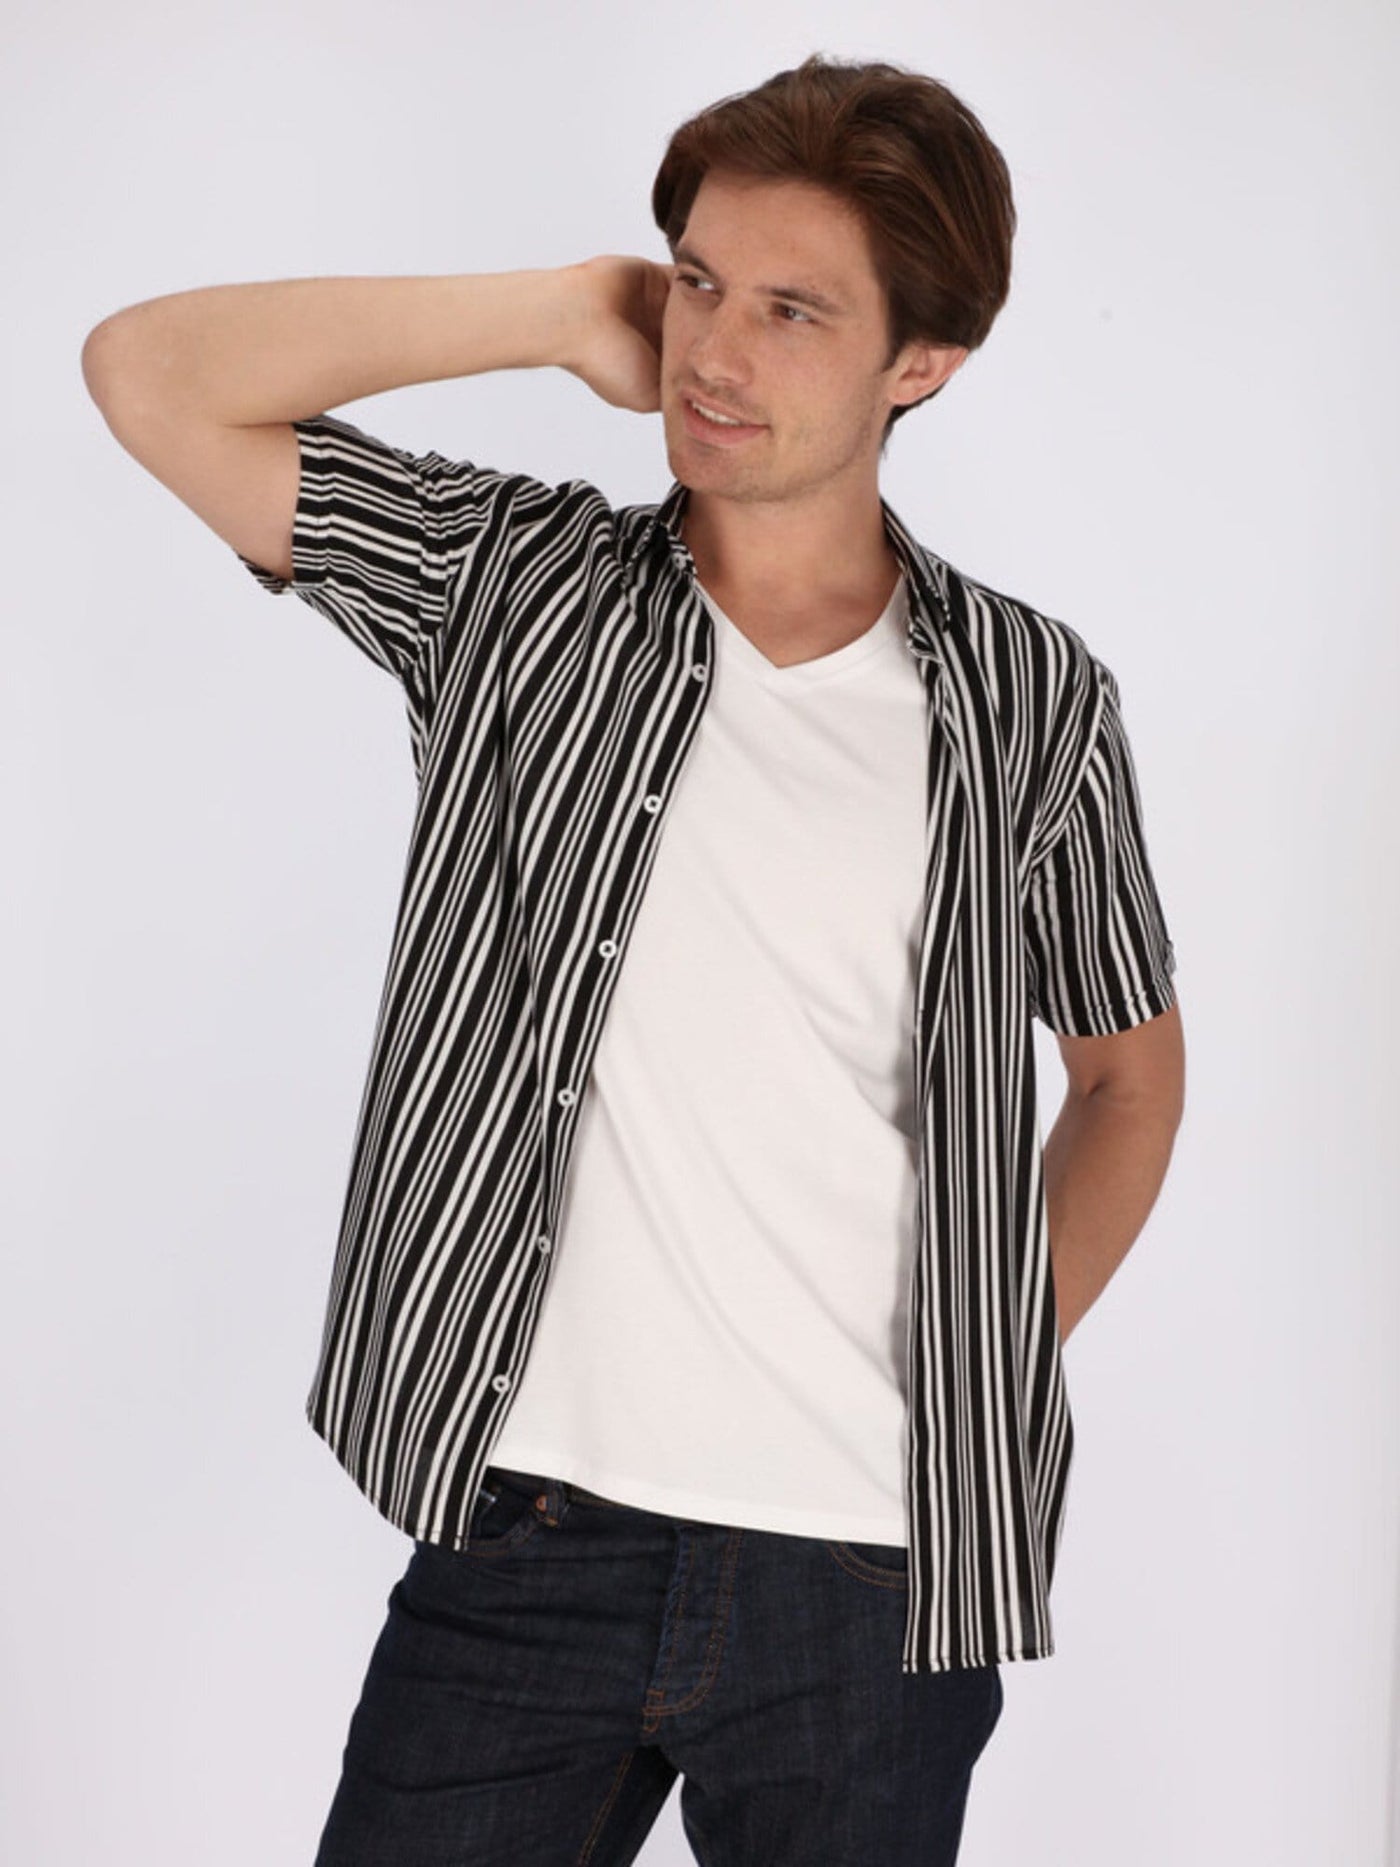 OR Shirts Vertical Striped Short Sleeve Casual Shirt